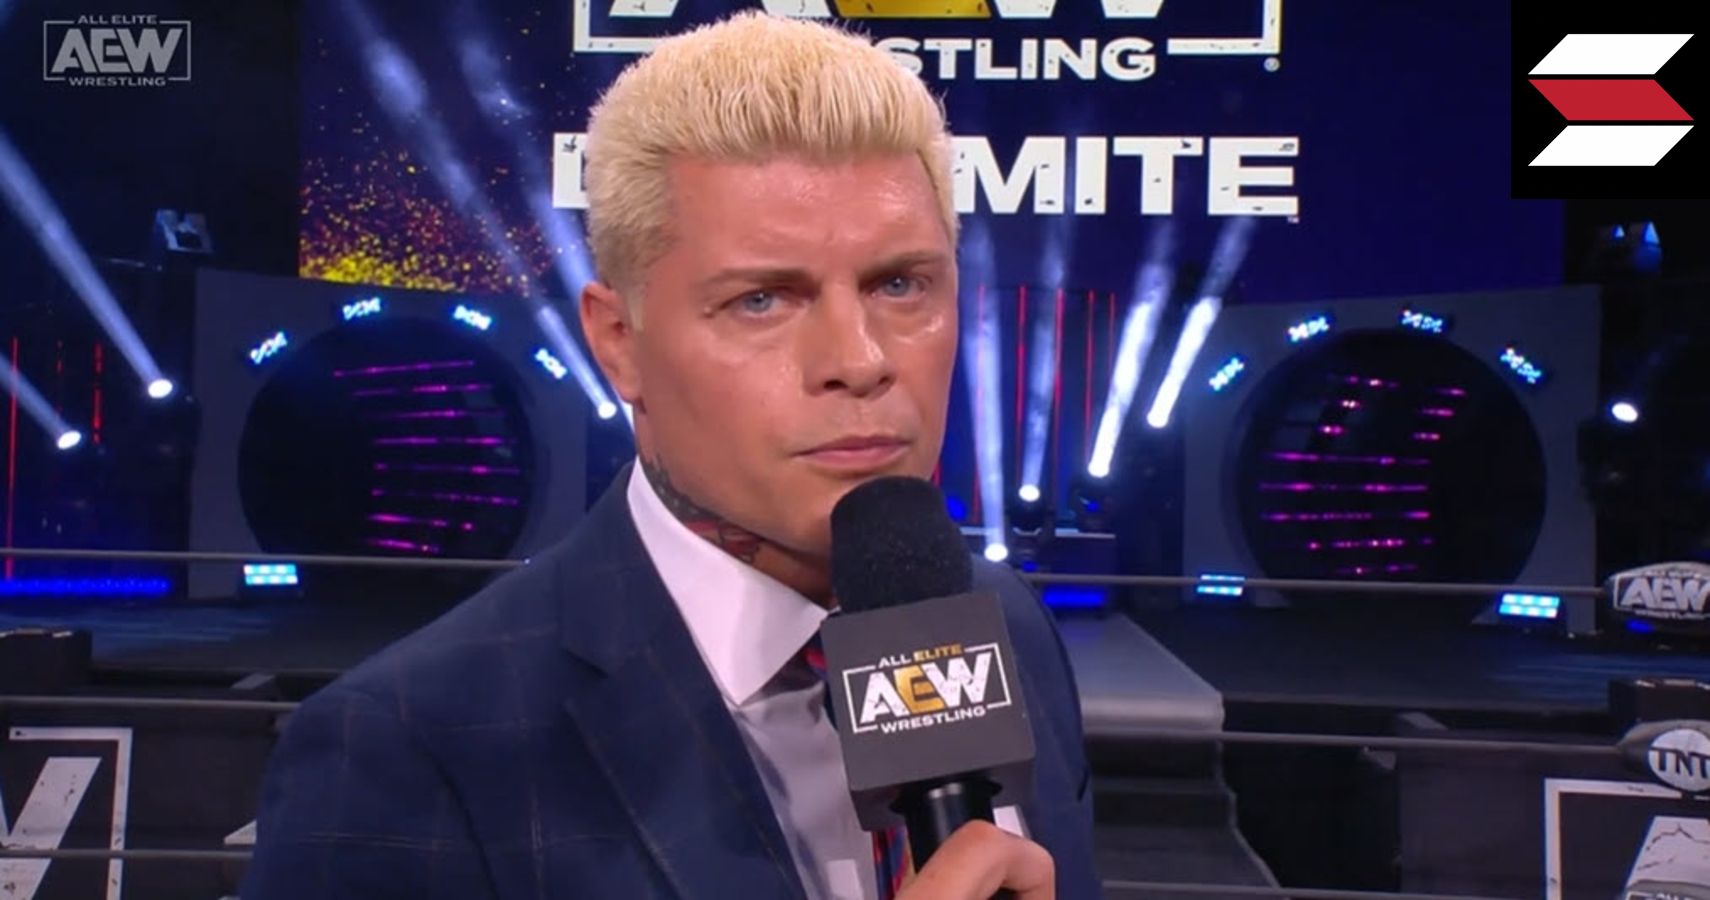 AEW star Cody Rhodes cutting a promo during his feud with Anthony Ogogo on the May 12, 2020 edition of Dynamite